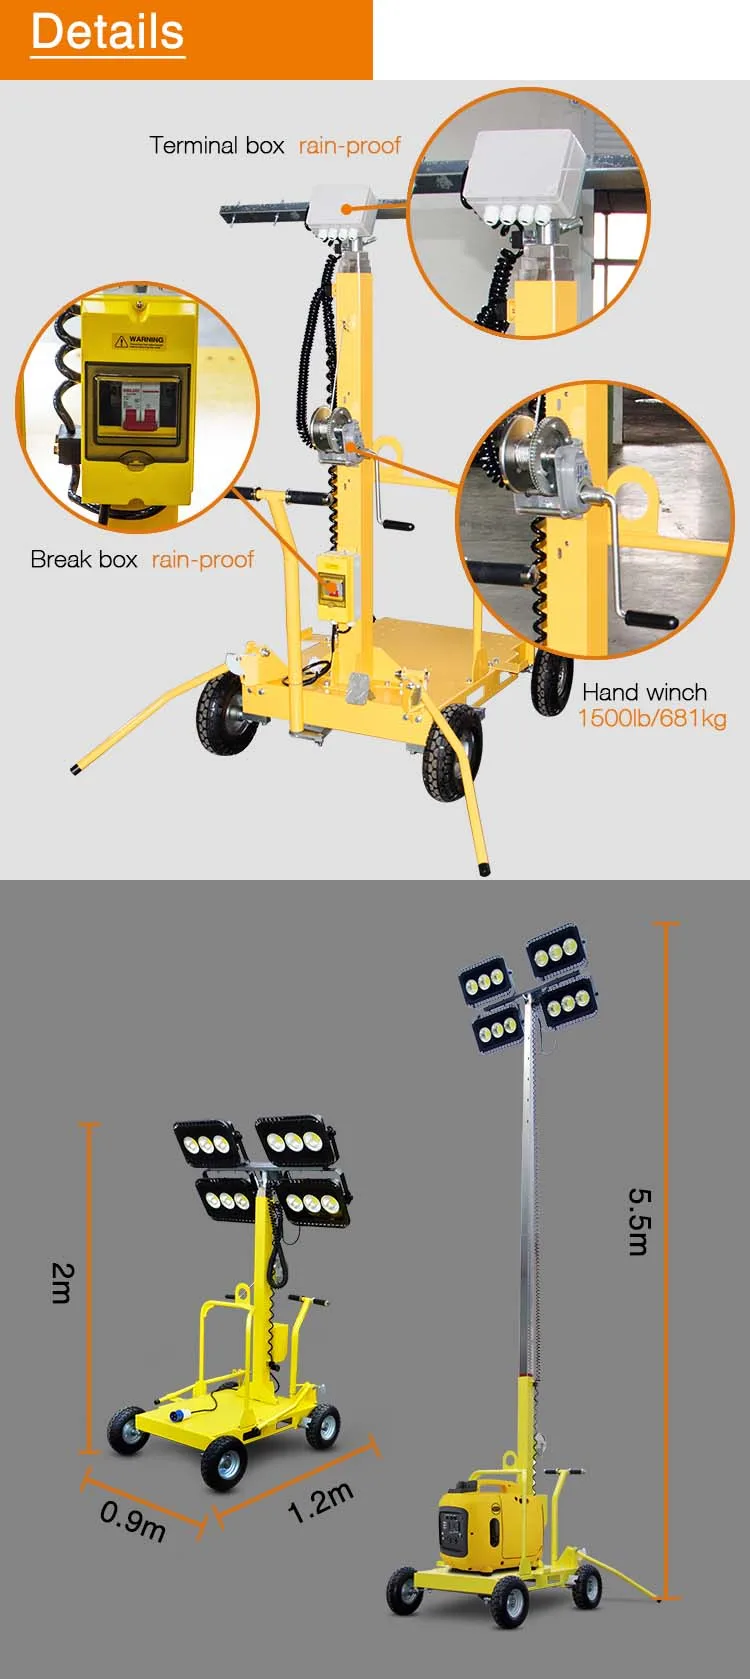 Mobile lighting tower for sale with small silent diesel generator portable lighting tower